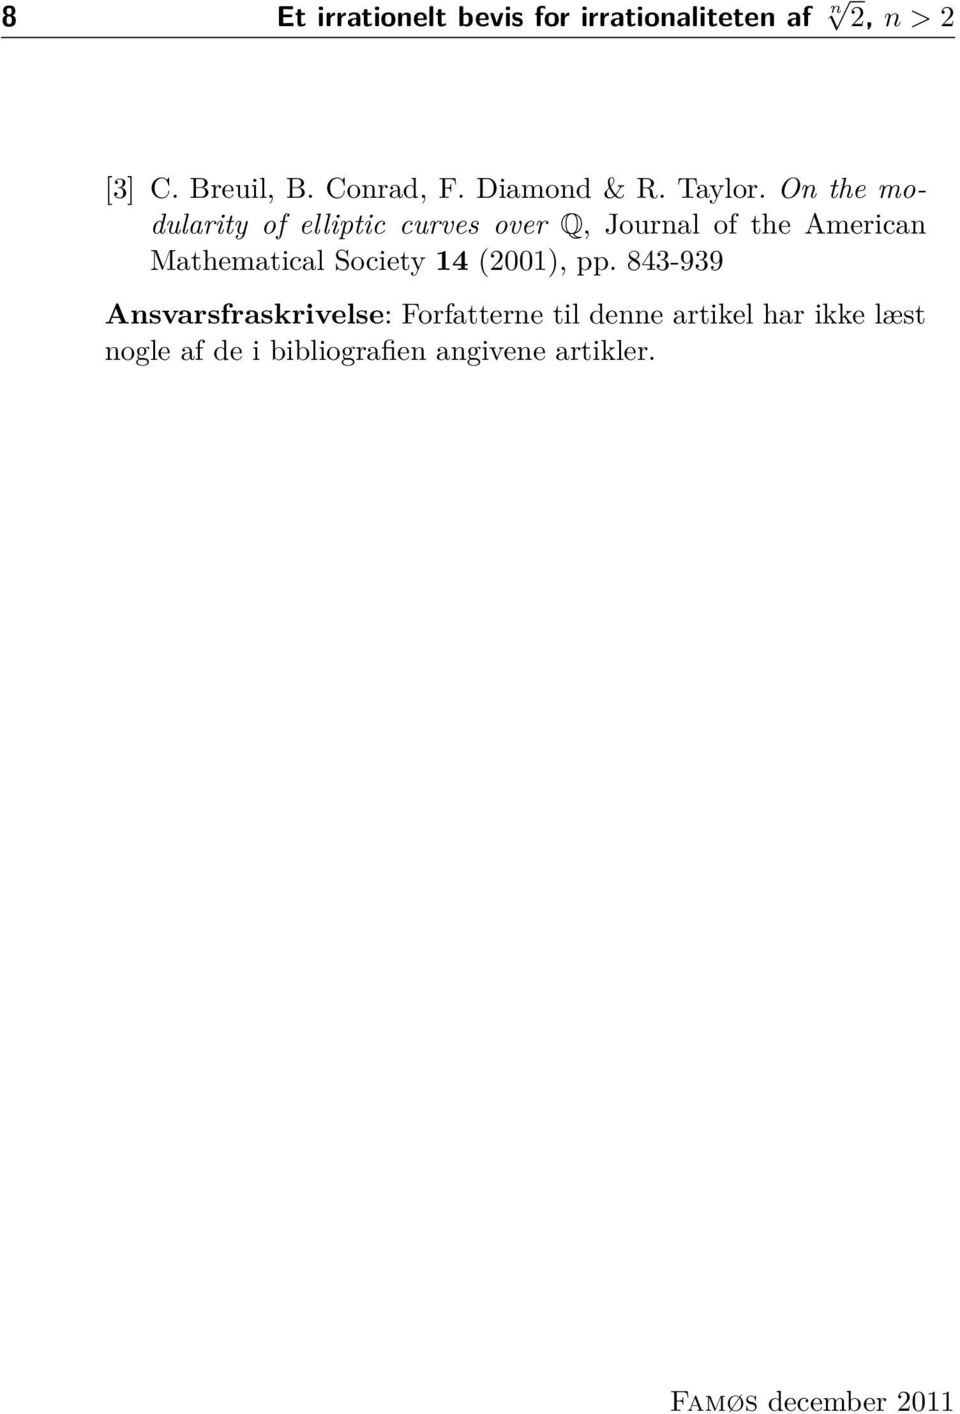 On the modularity of elliptic curves over Q, Journal of the American Mathematical